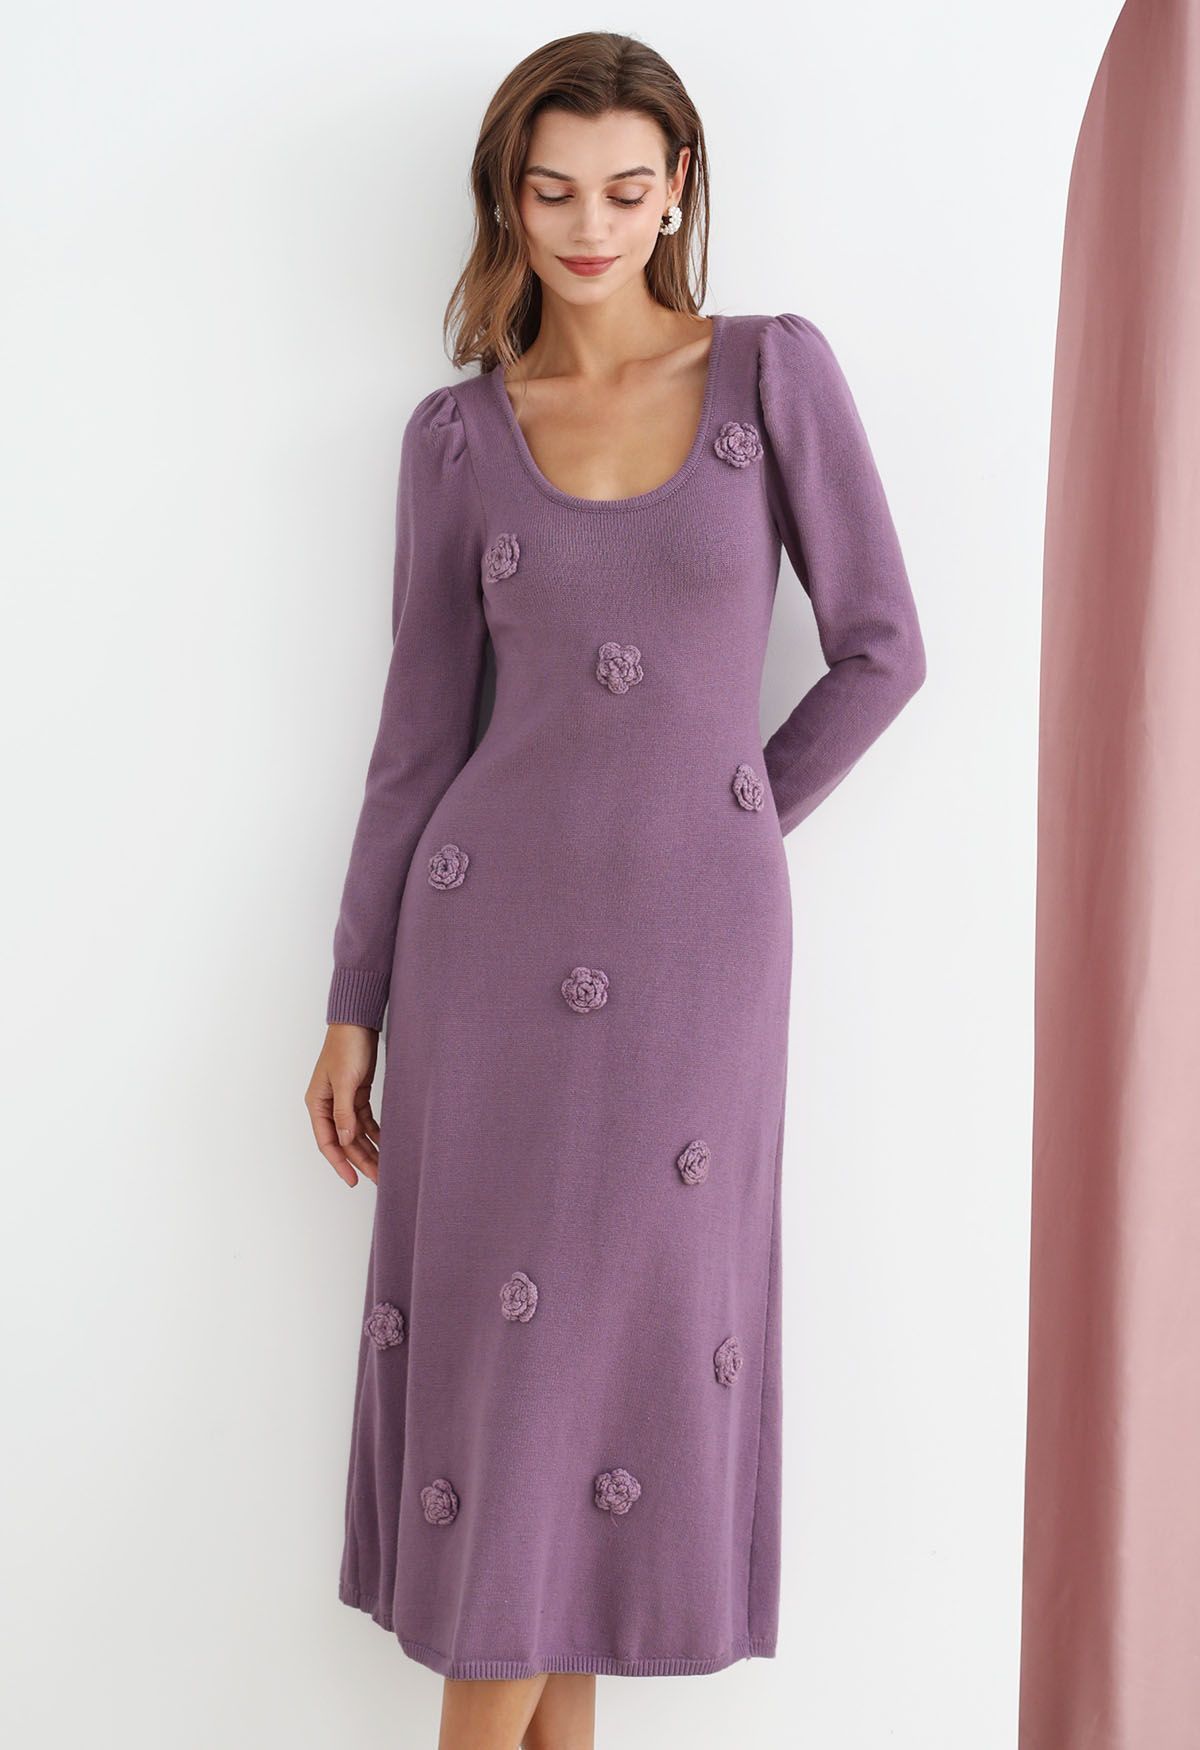 Scoop Neck Stitch Flower Knit Dress in Lilac | Chicwish